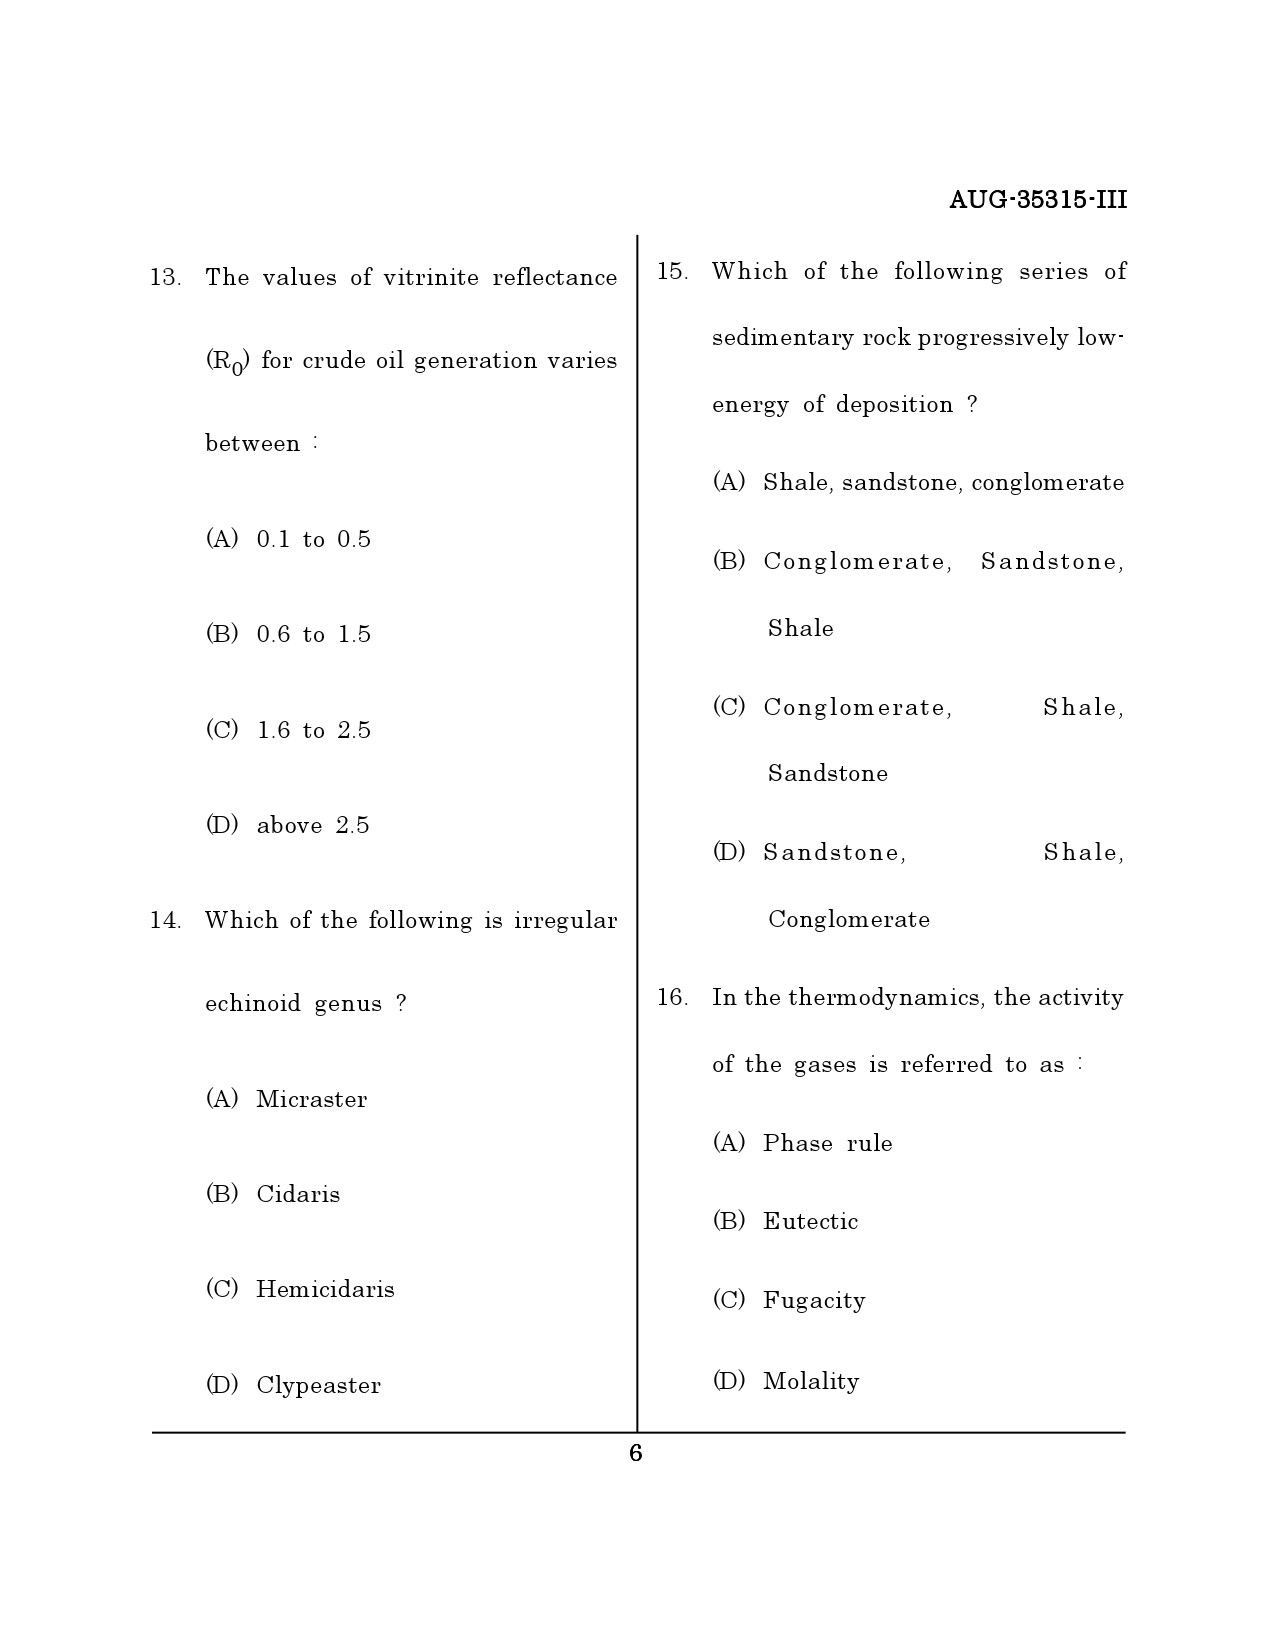 Maharashtra SET Earth Atmospheric Ocean Planetary Science Question Paper III August 2015 5